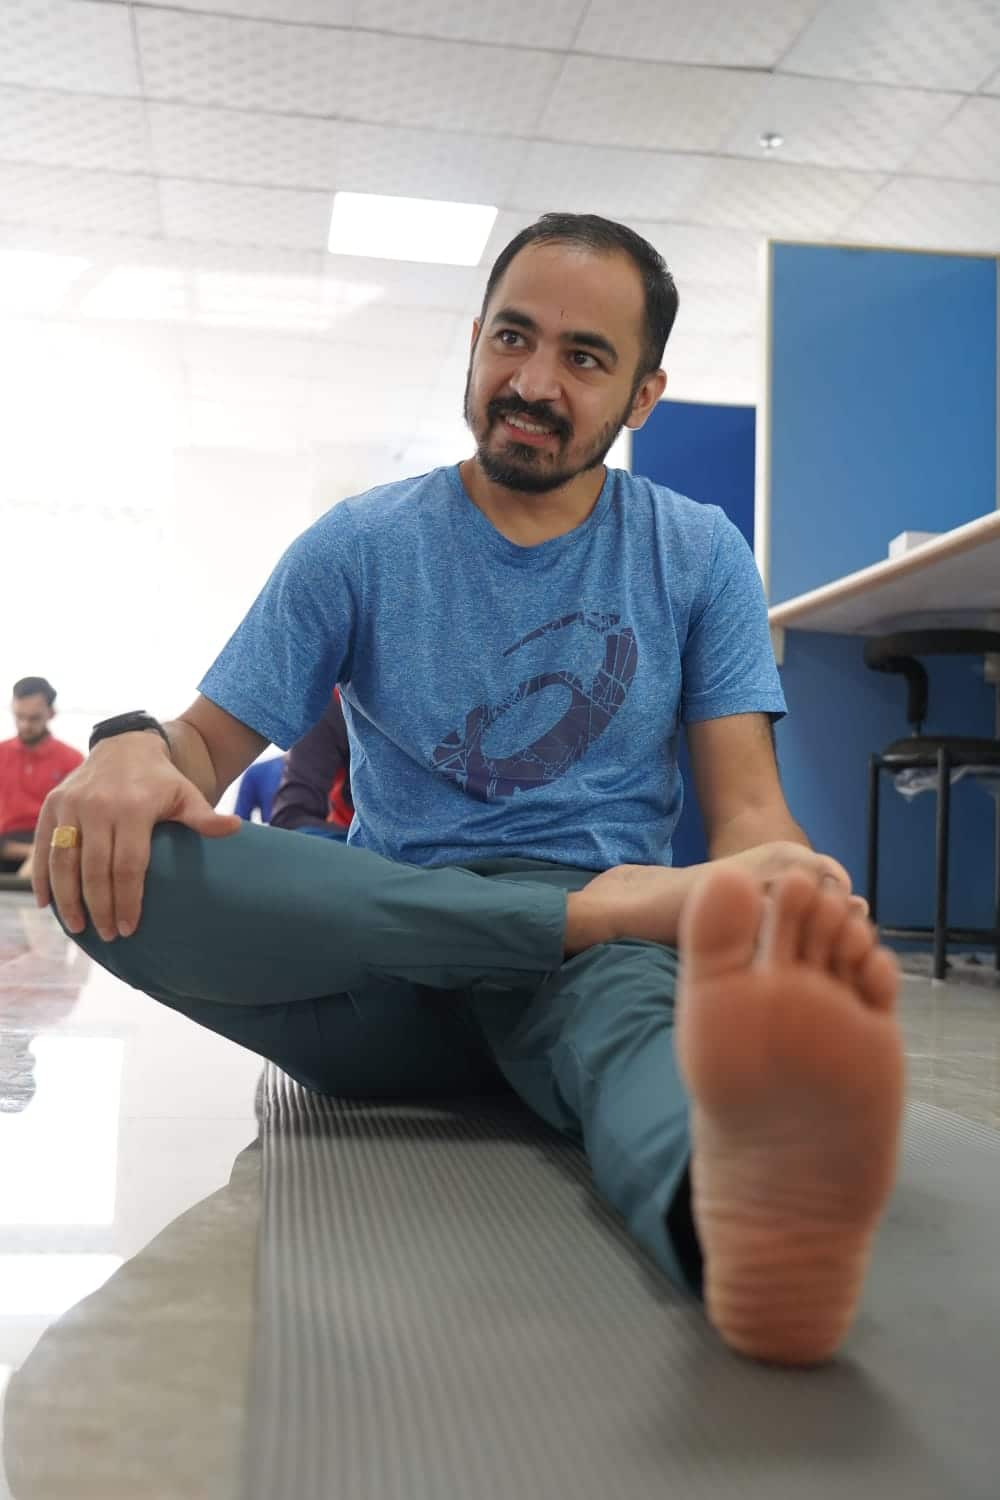 Cynoteck focuses on life Equilibrium by practicing yoga - Cynoteck